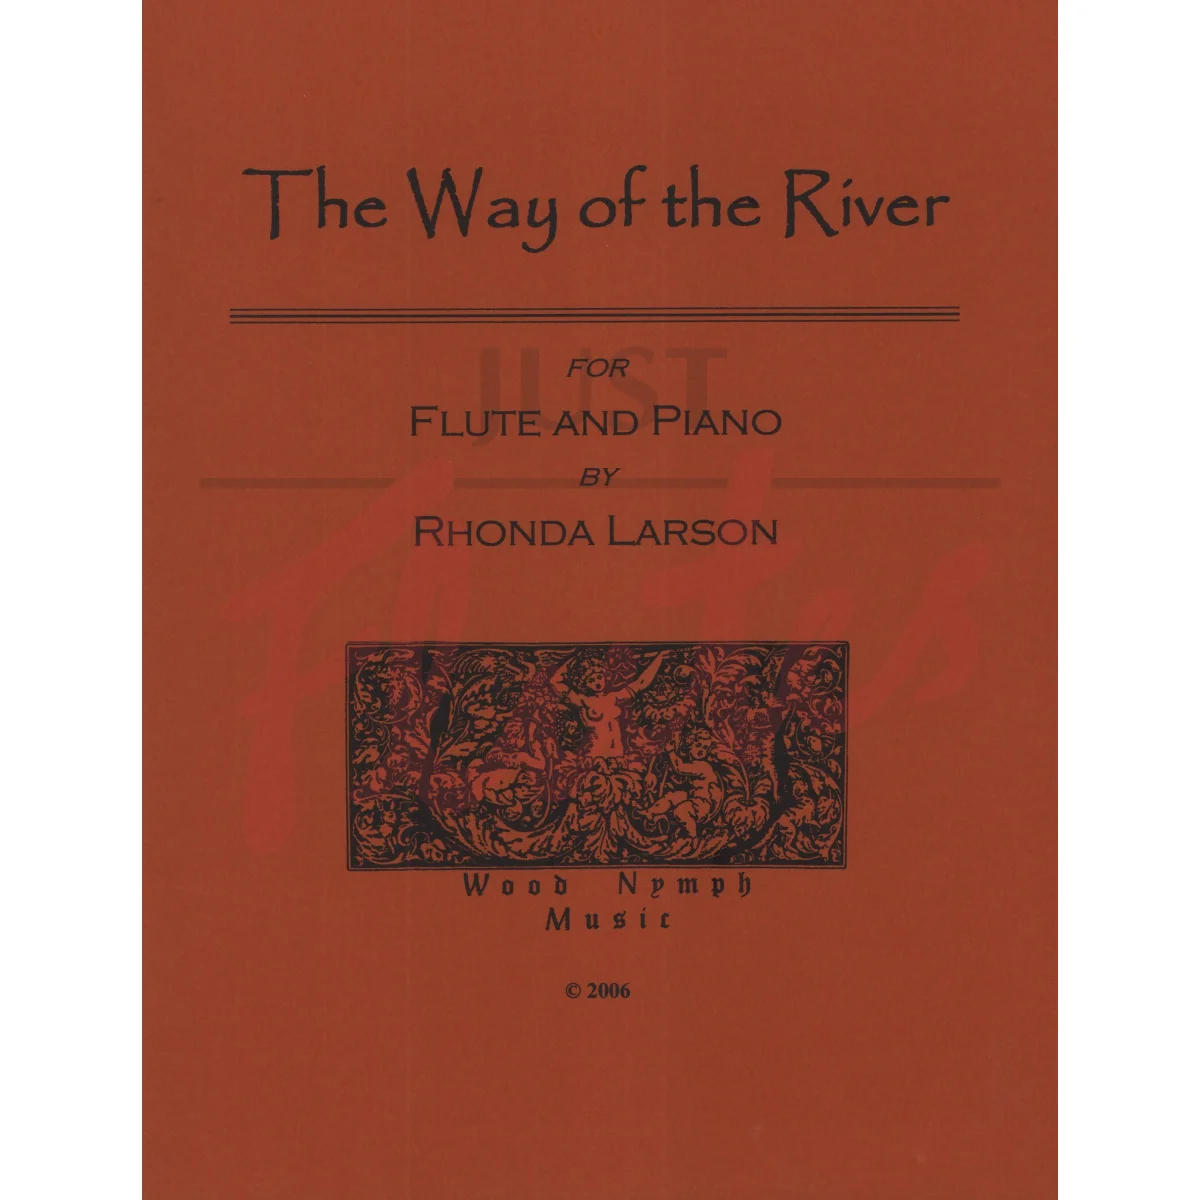 The Way of the River for Flute and Piano